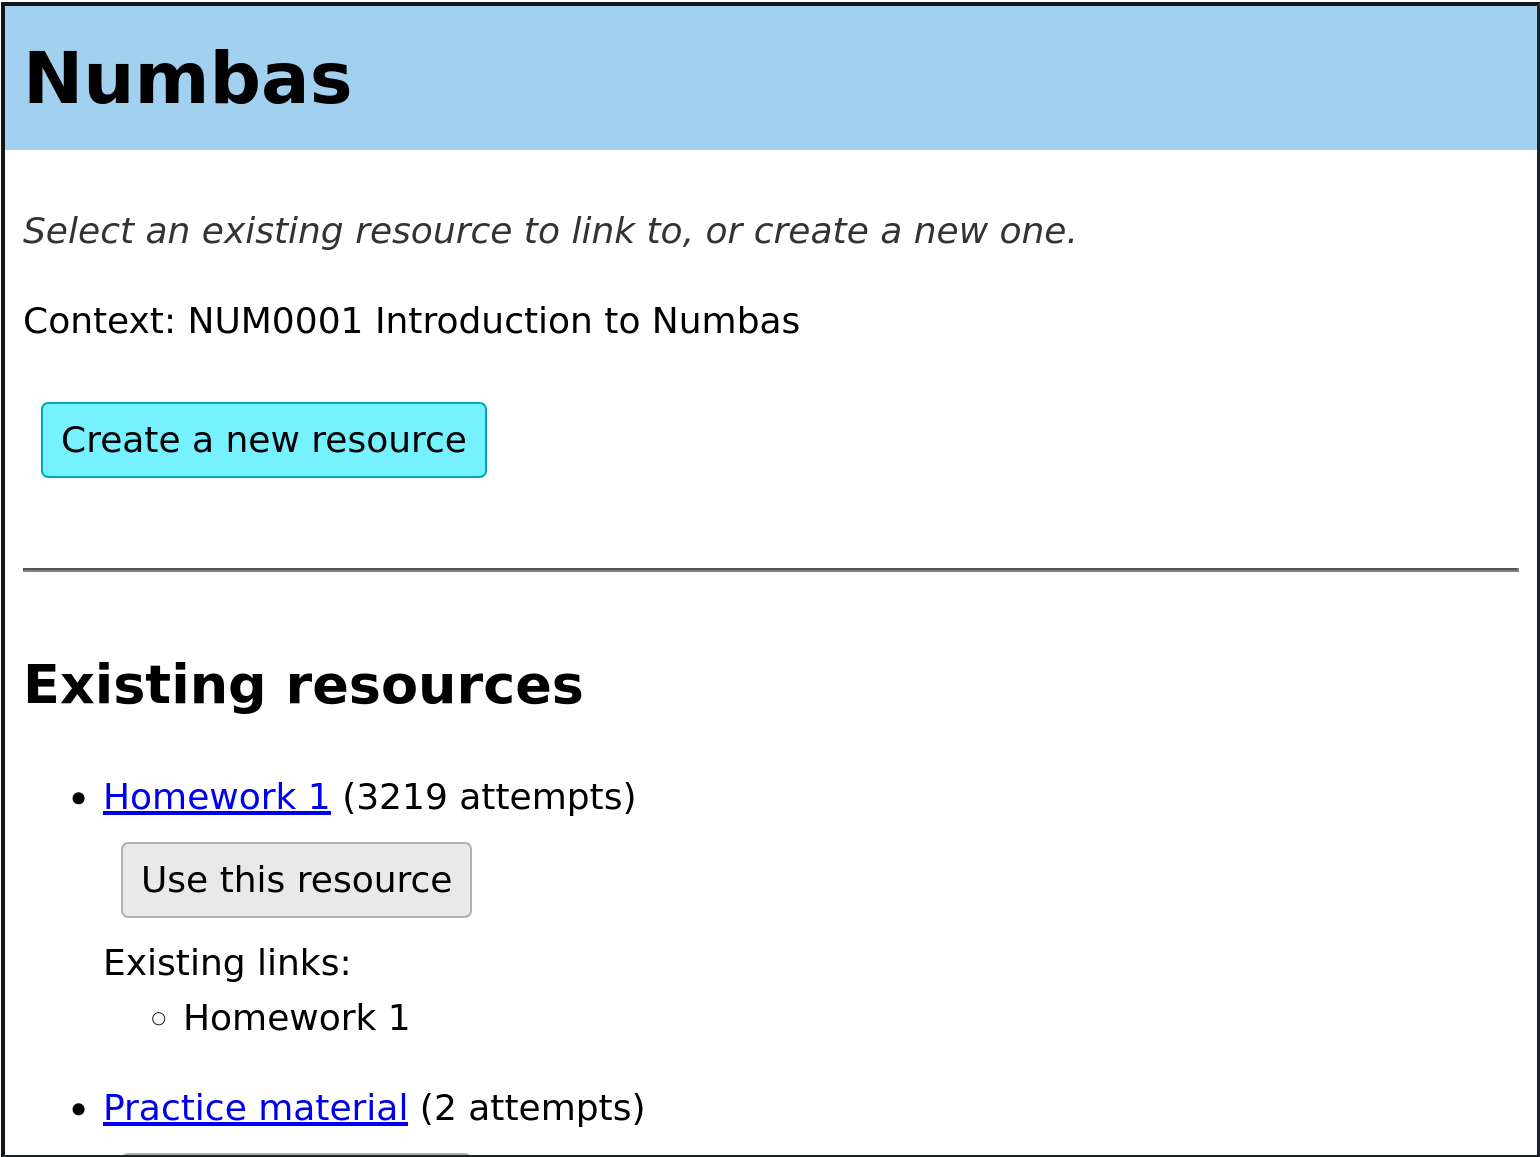 "Select an existing resource to link to, or create a new one". "Context: NUM0001 Introduction to Numbas". A button labelled "Create a new resource", followed by a header "Existing resources", with a list of resources each with a button labelled "Use this resource".